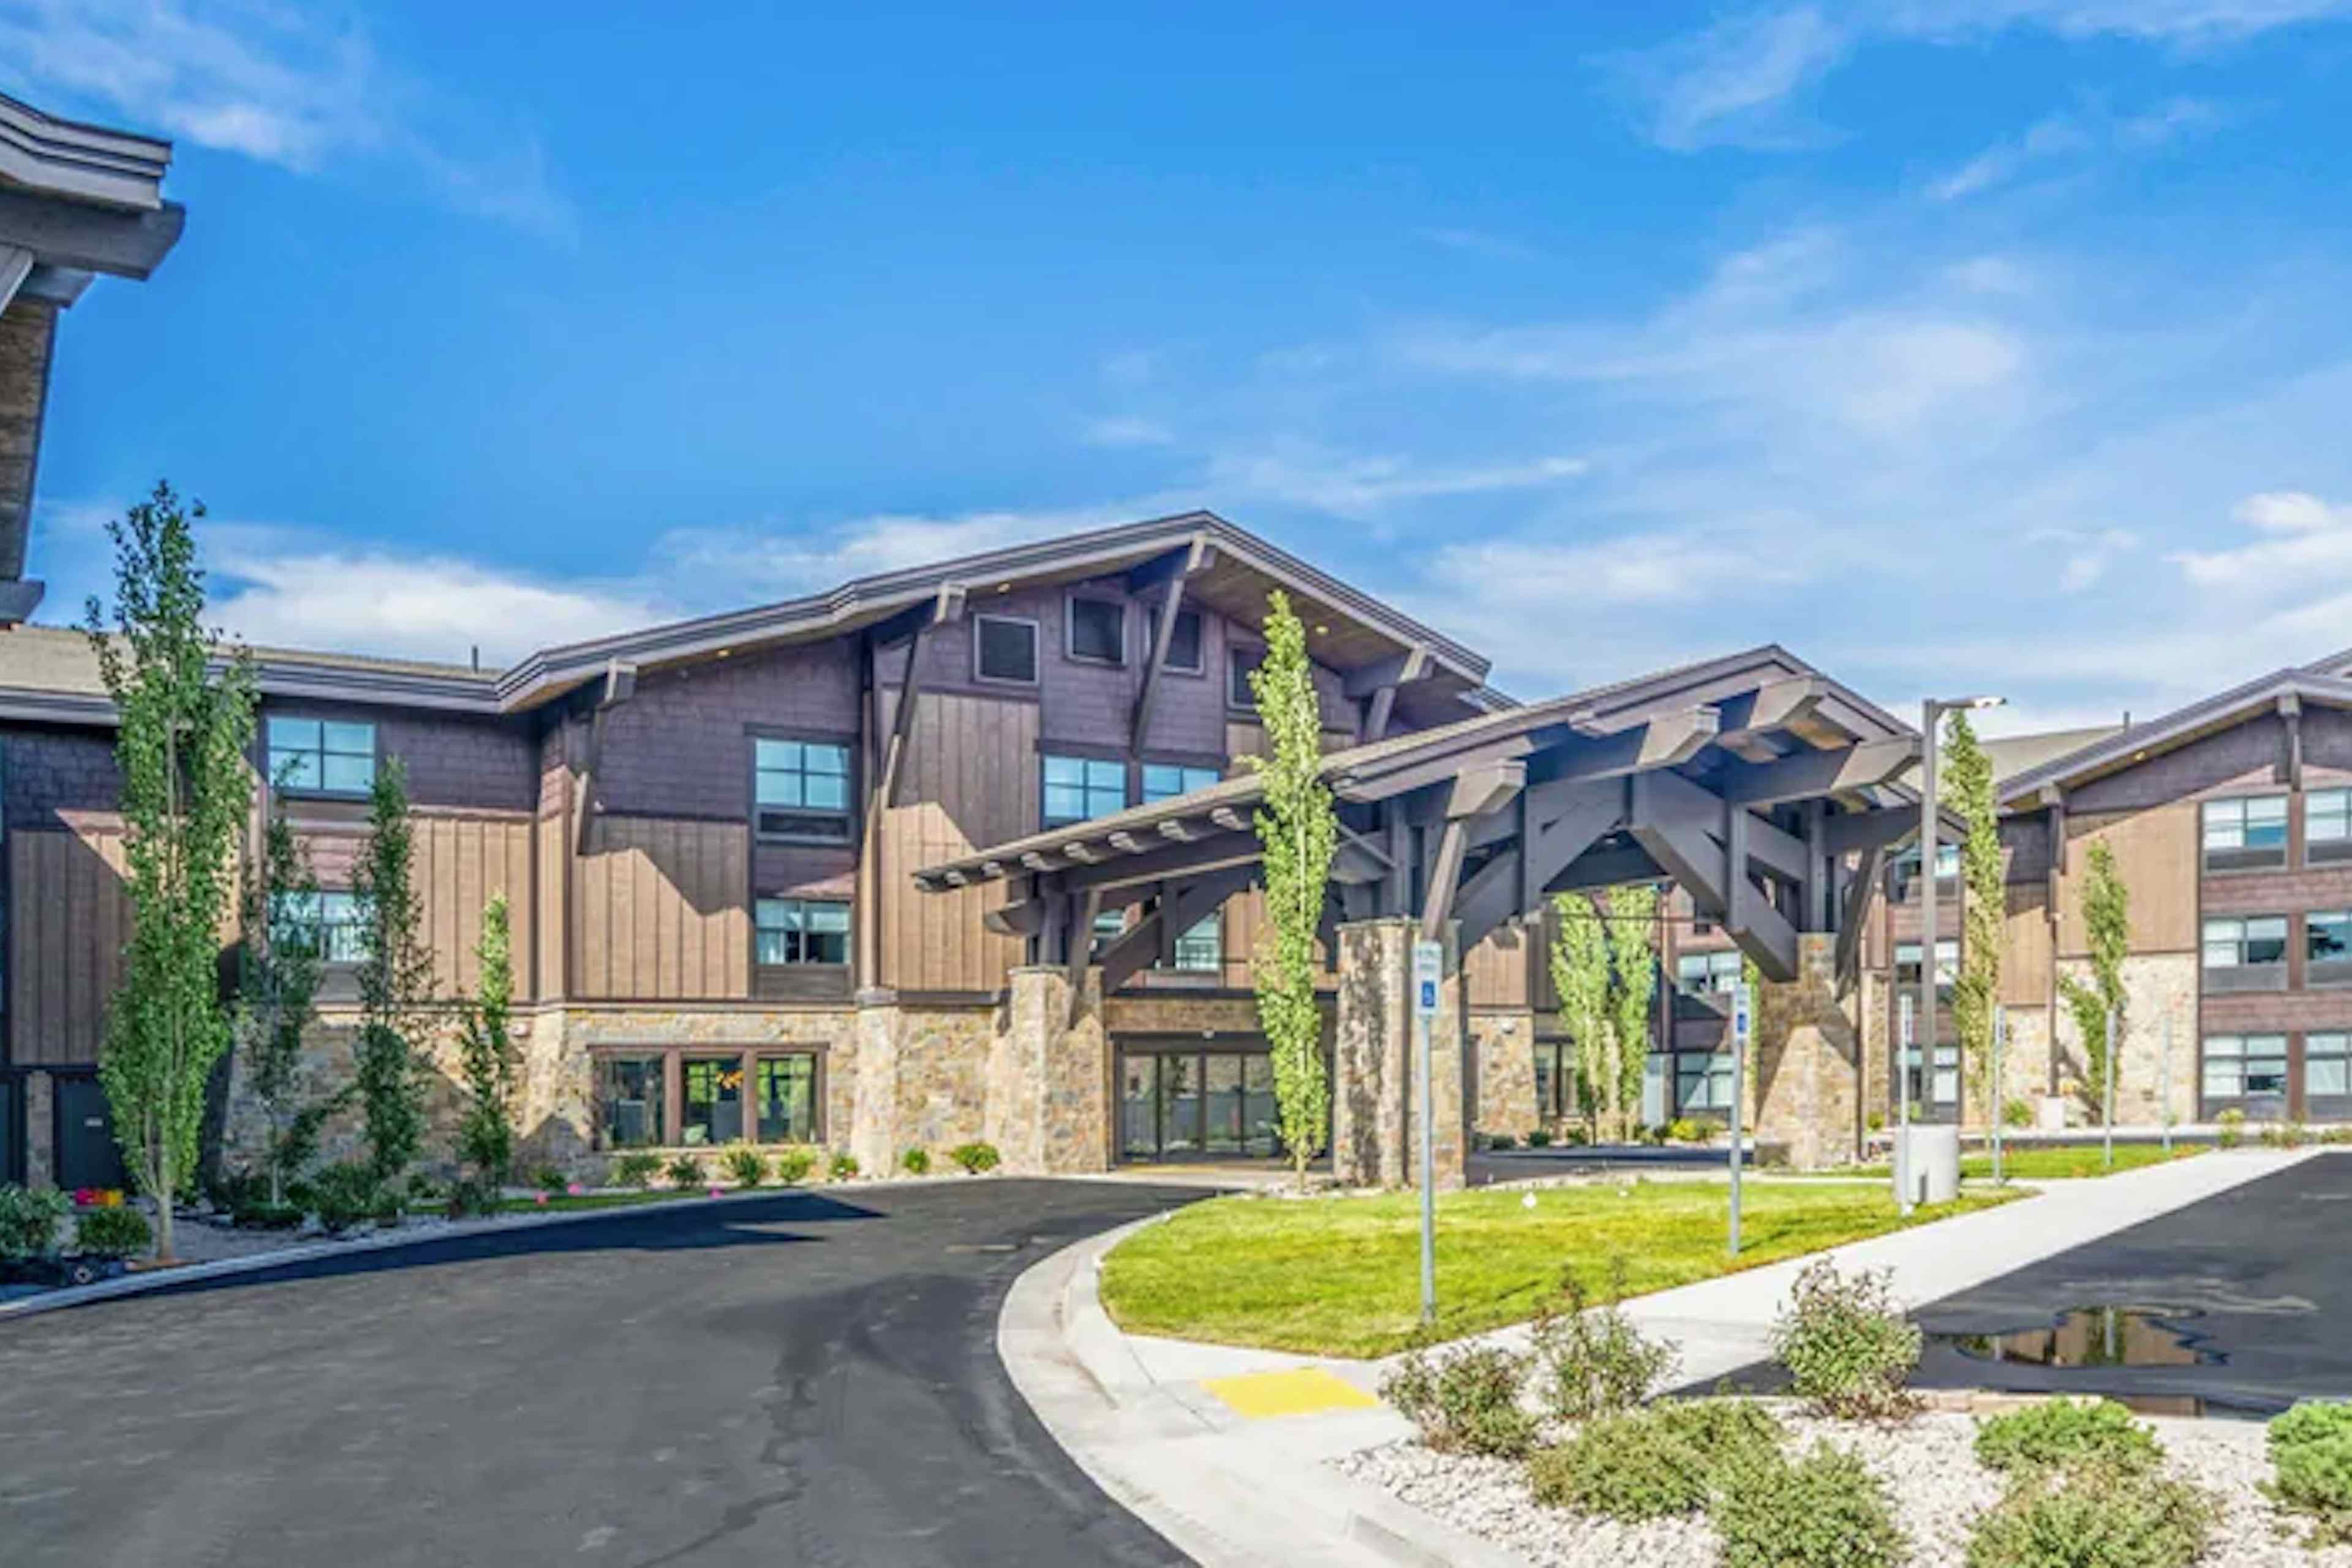 External view of the brand new SpringHill Suites hotel by Marriott, located just outside of Yellowstone National Park of the Yellowstone Teton Territory